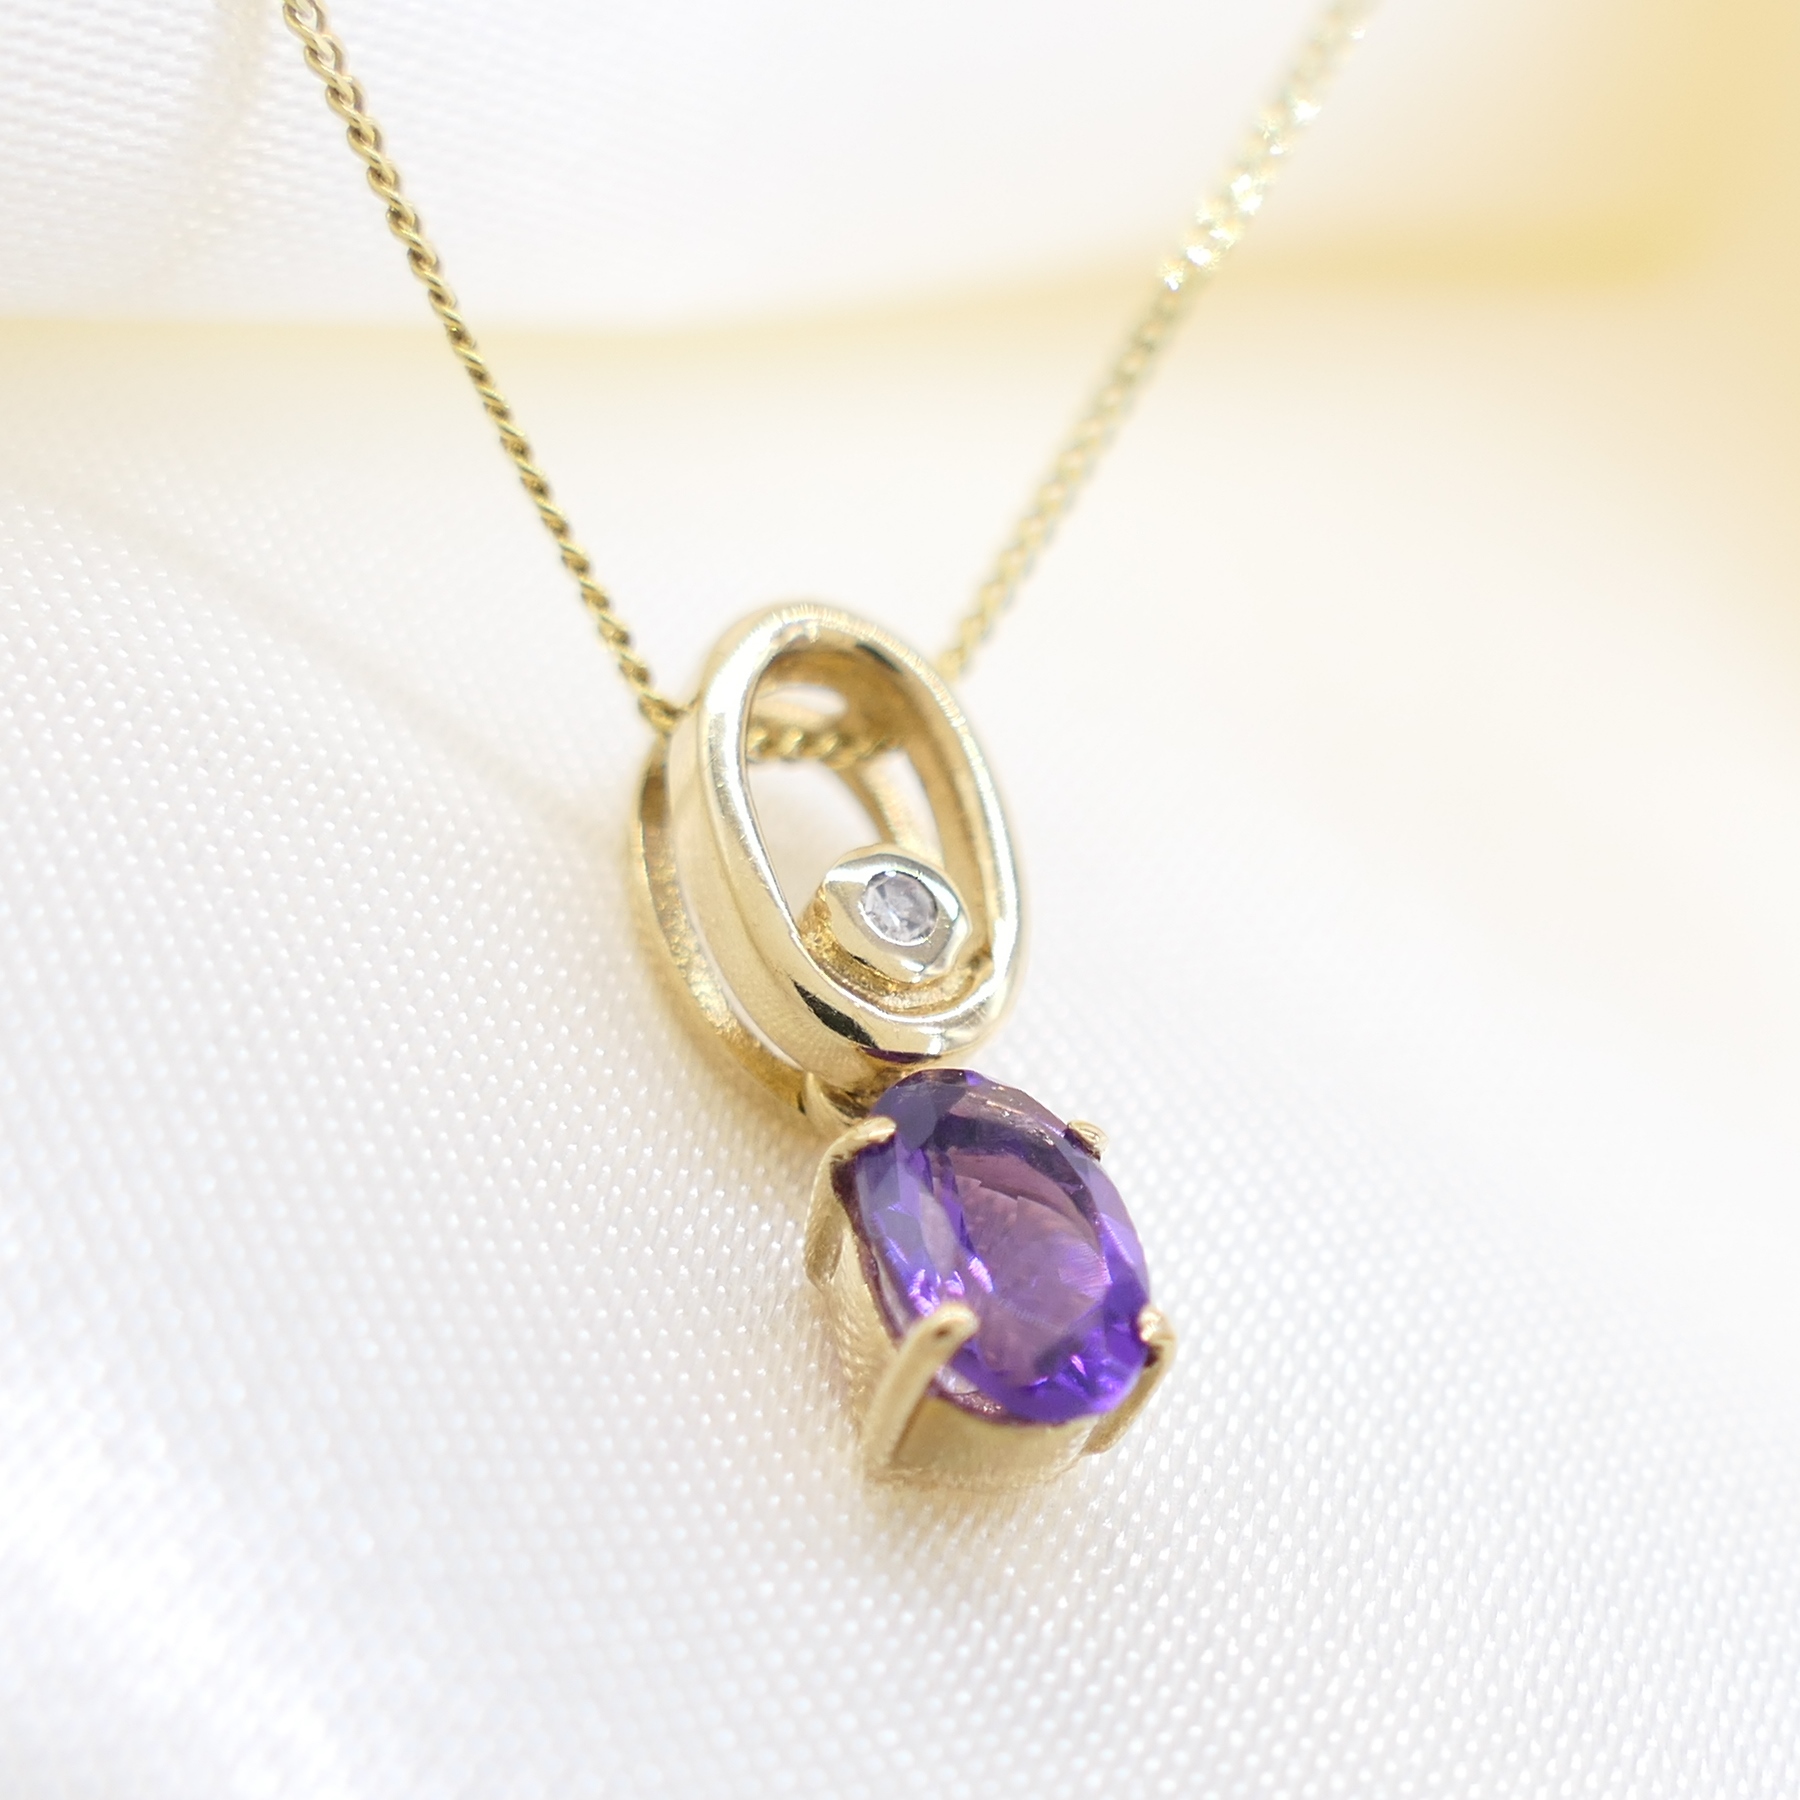 Attractive Yellow Gold Amethyst and Diamond Necklace, Supplied With A Gift Box - Image 4 of 6